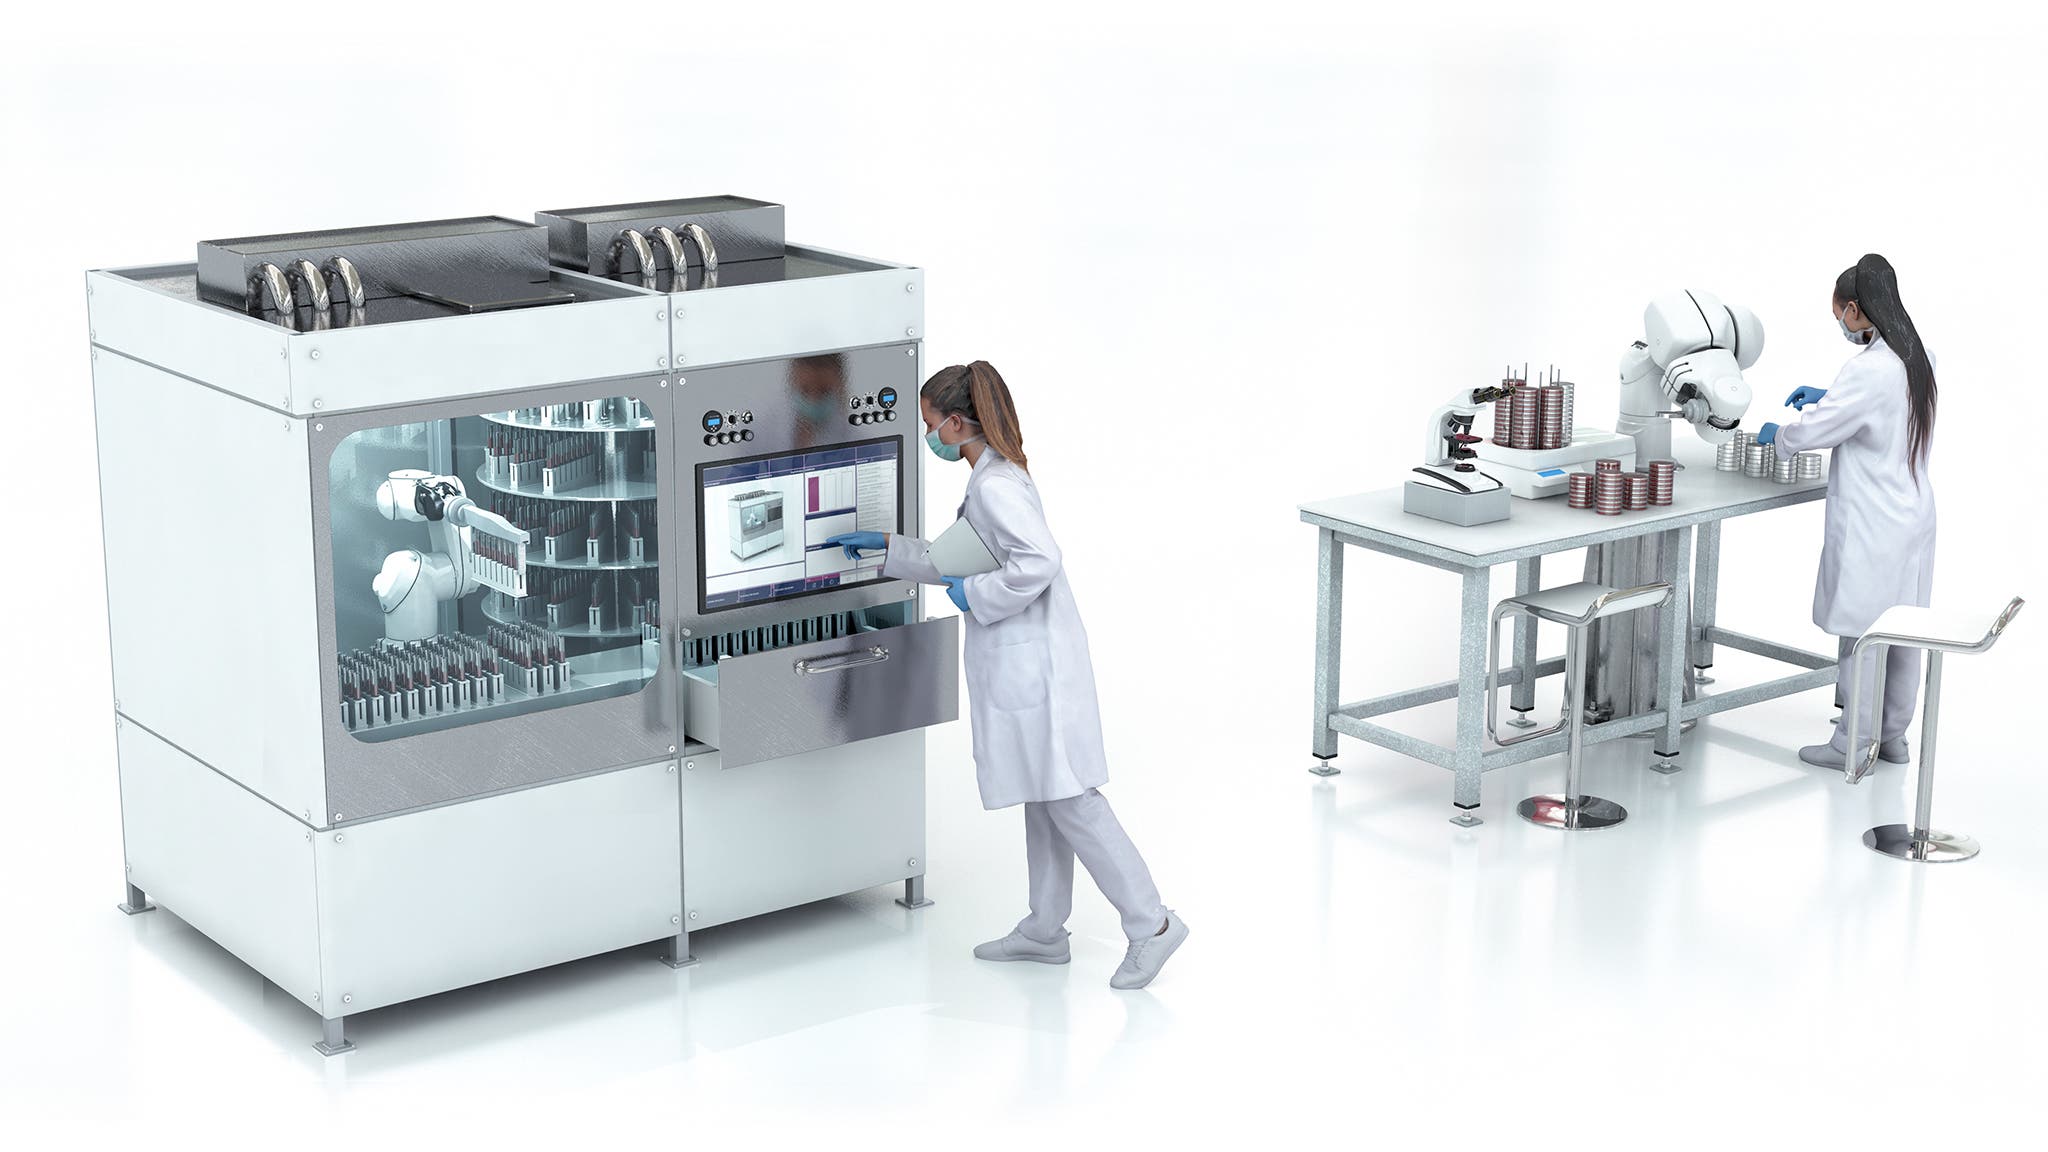 Diagnostics cell managed by TX2-40 with traceability and flexibility 3D line